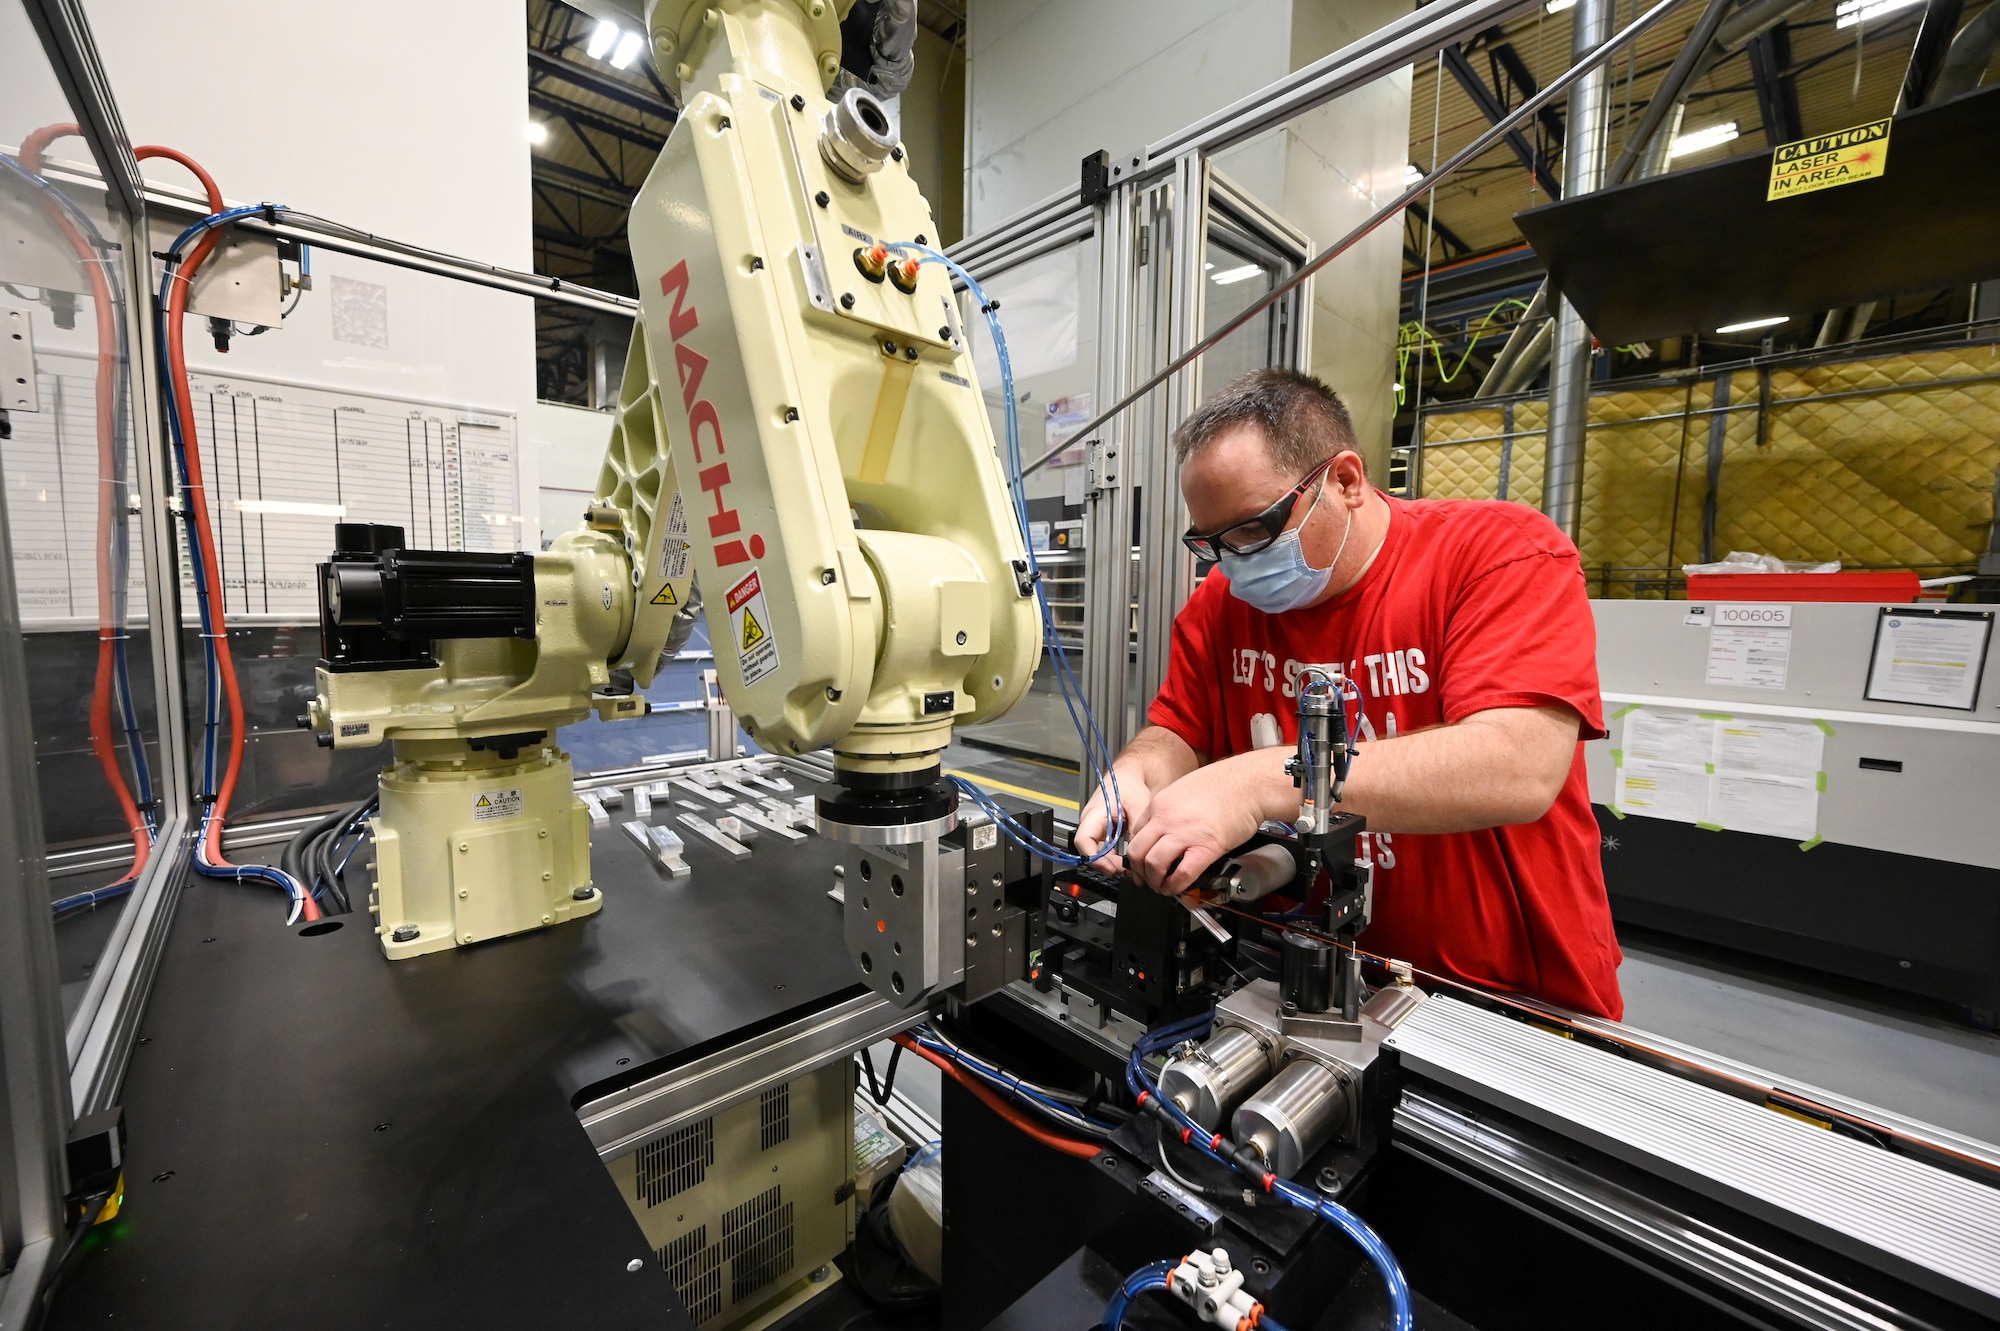 Matthew Noorda, 526th Electronics Maintenance Squadron, prepares an automated forming machine for operation at Hill Air Force Base, Utah, Sept. 24, 2021. The 526th EMXS replaced its process of winding and forming coils by hand with automated equipment in order to save time and money while improving product quality and shop safety. (U.S. Air Force photo by R. Nial Bradshaw)